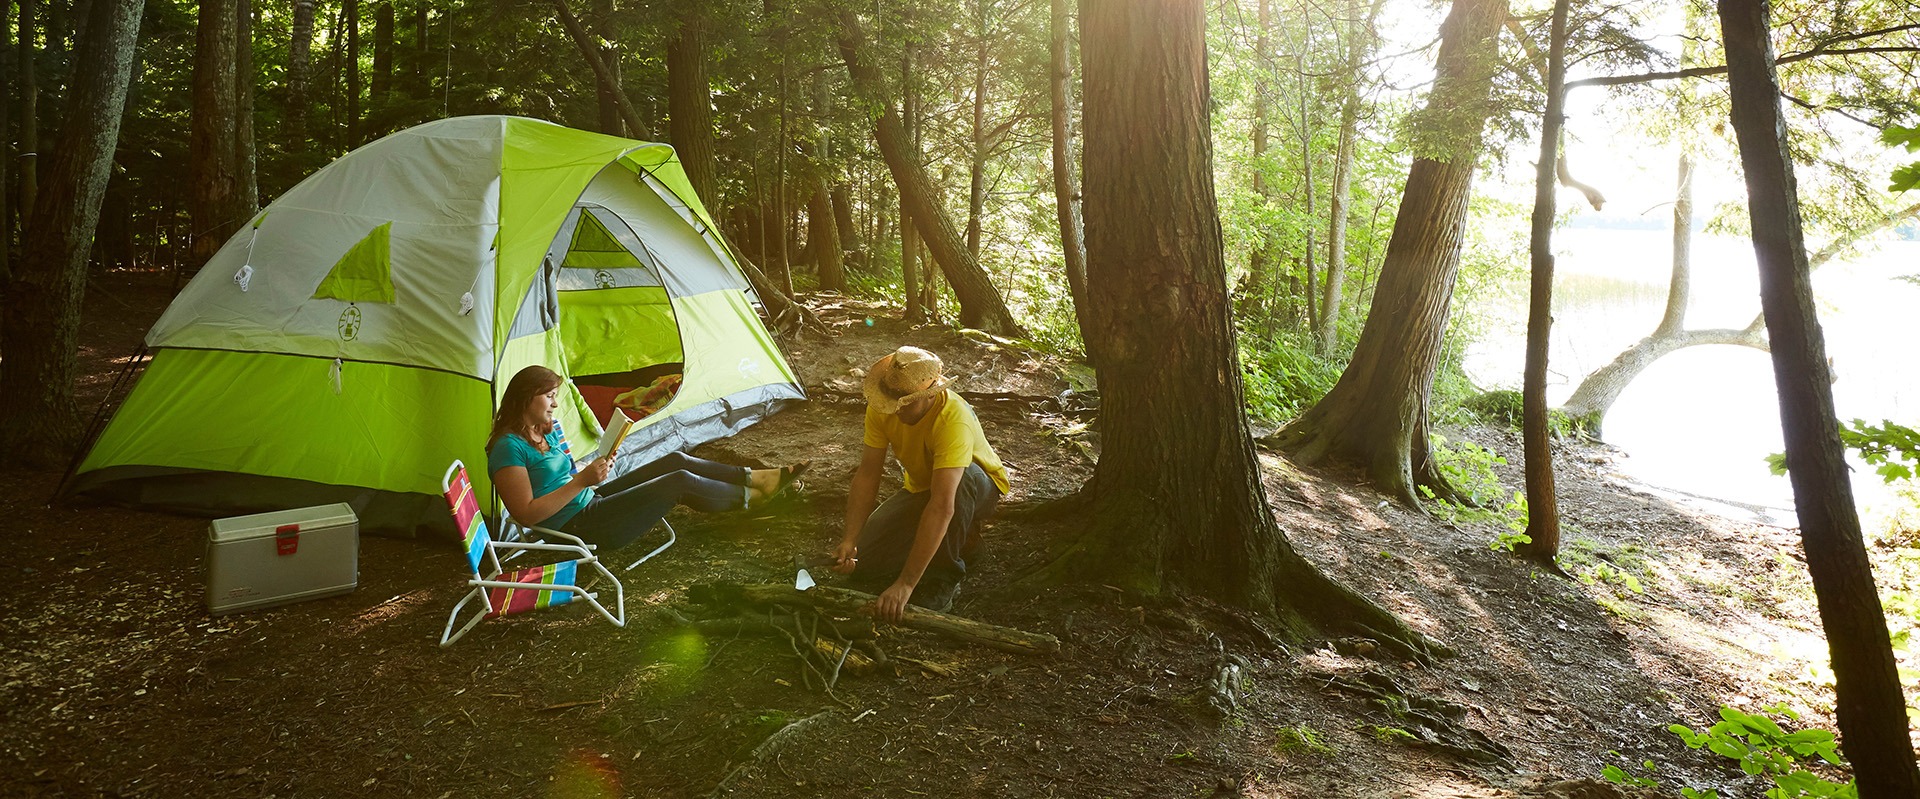 A couple does camping activities near their tent in the woods, by a lake.